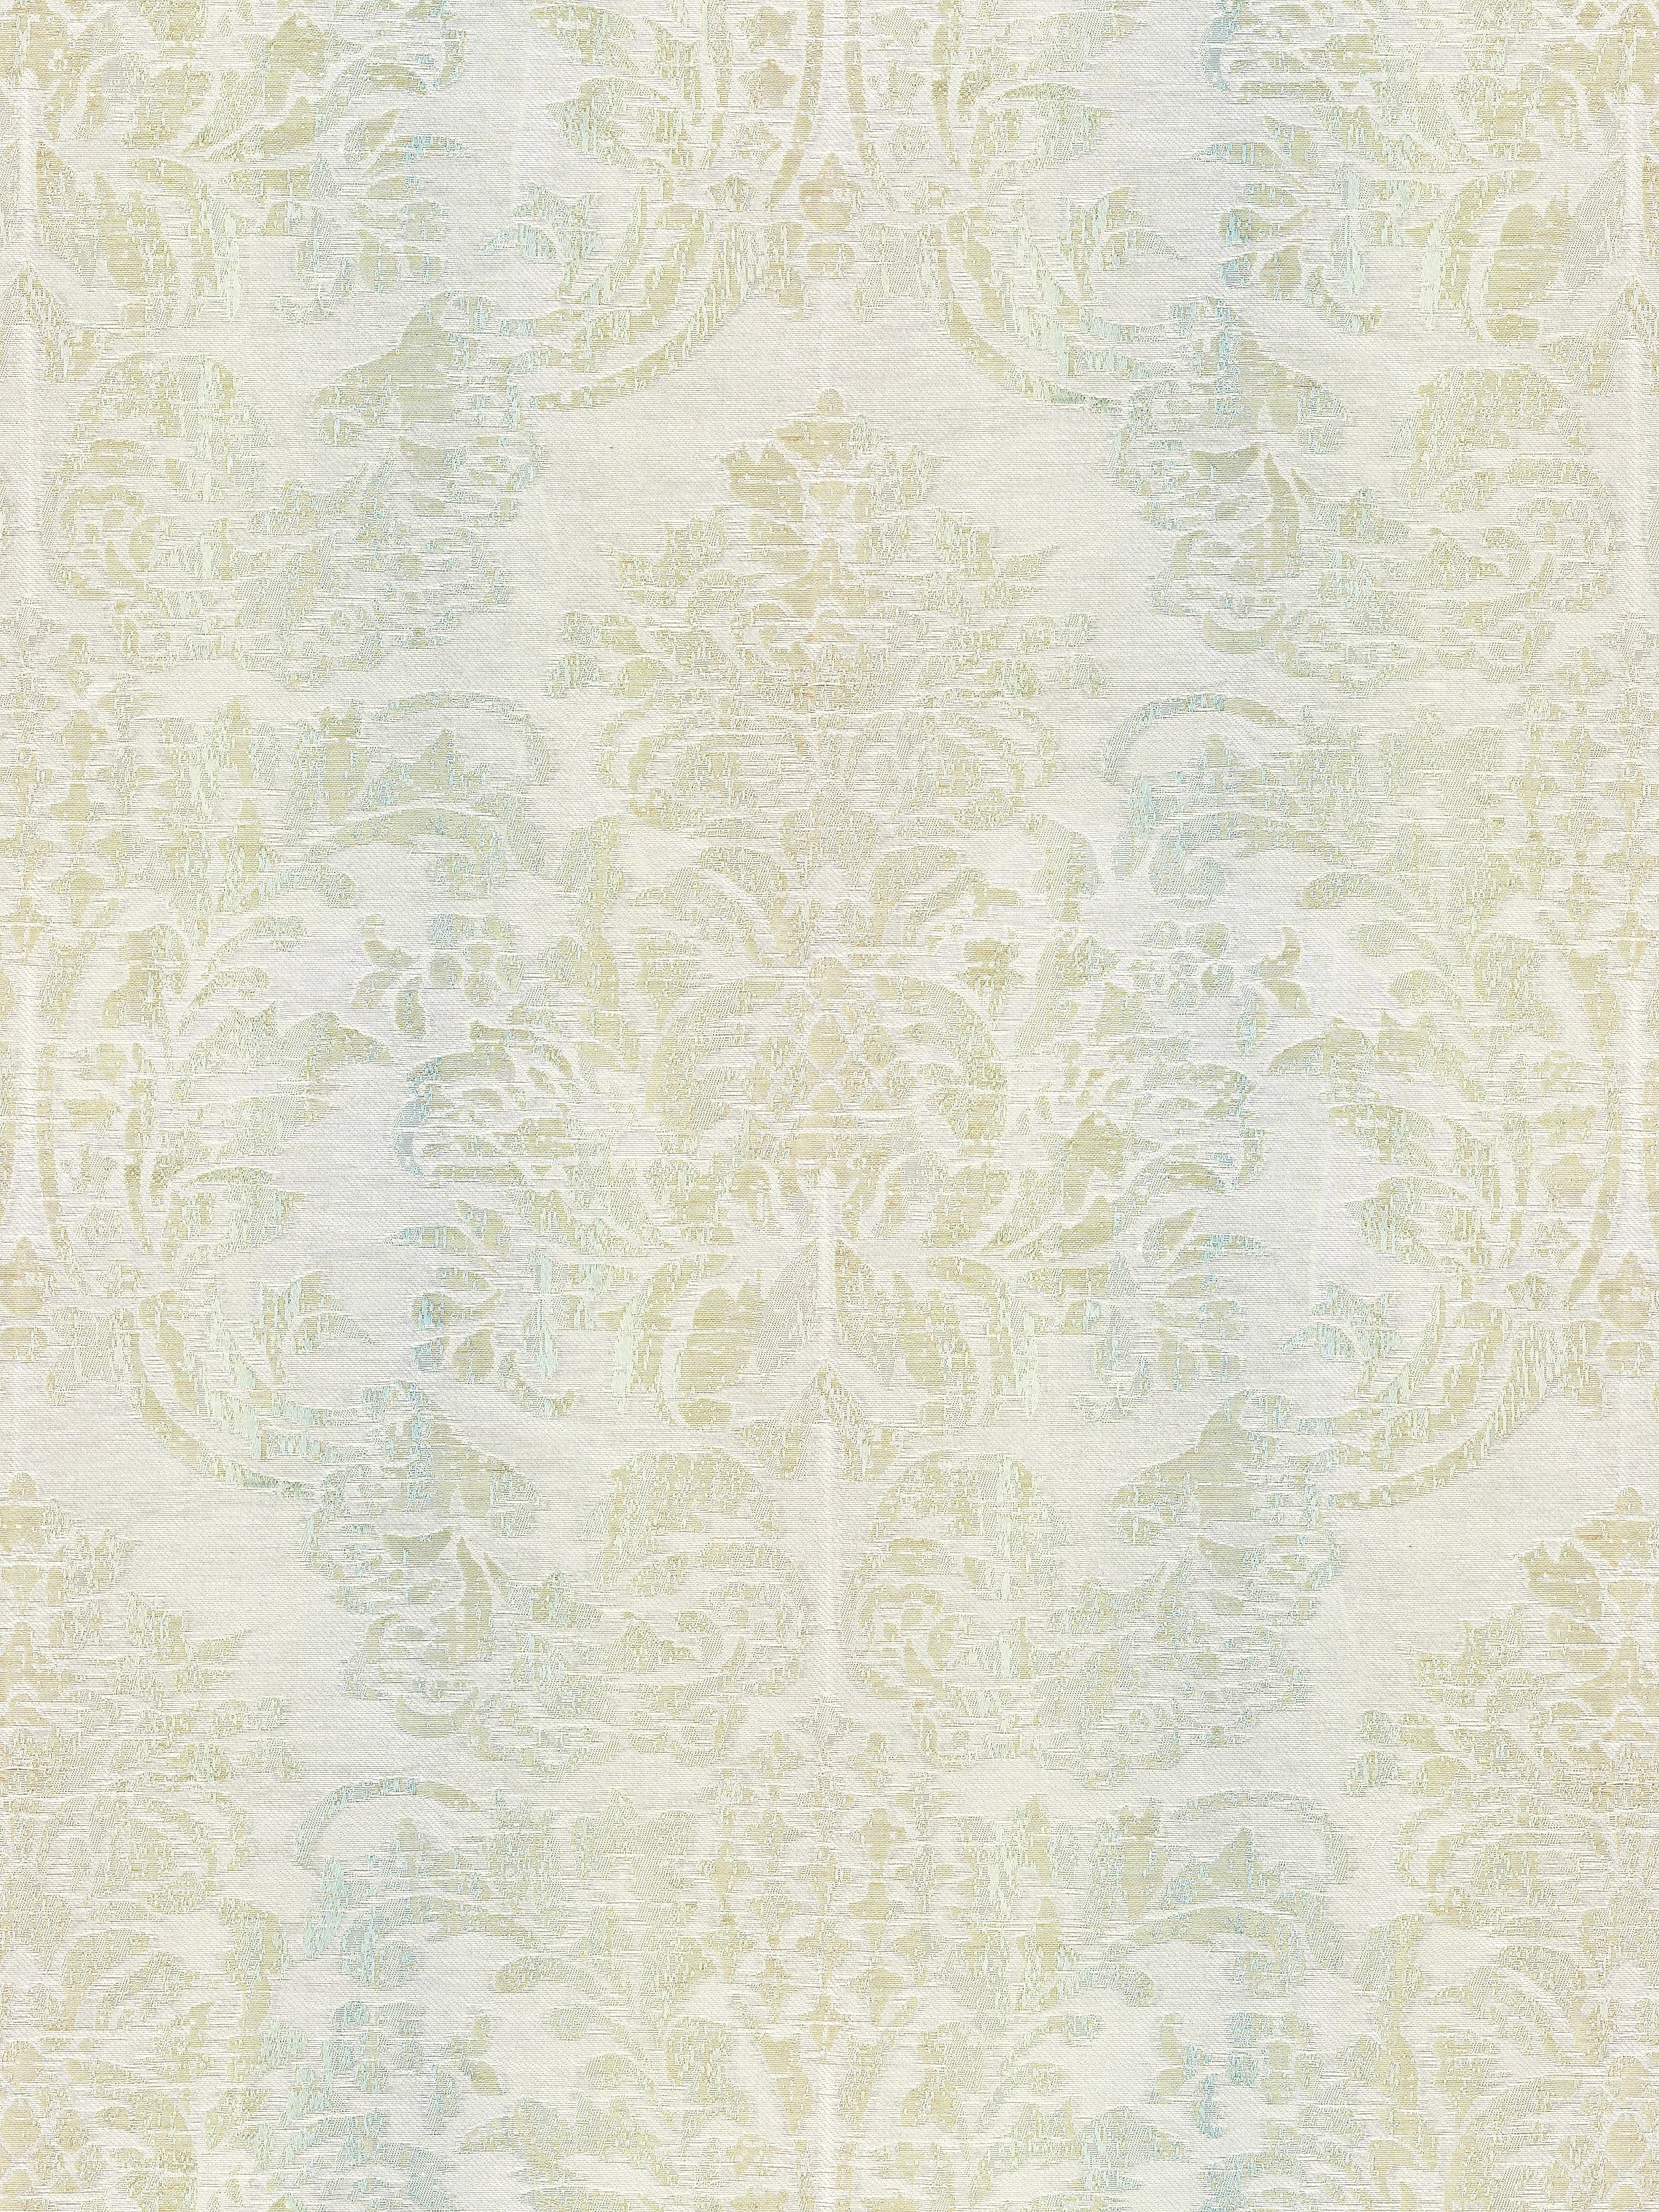 Sorrento Linen Damask fabric in mineral color - pattern number SC 000227093 - by Scalamandre in the Scalamandre Fabrics Book 1 collection